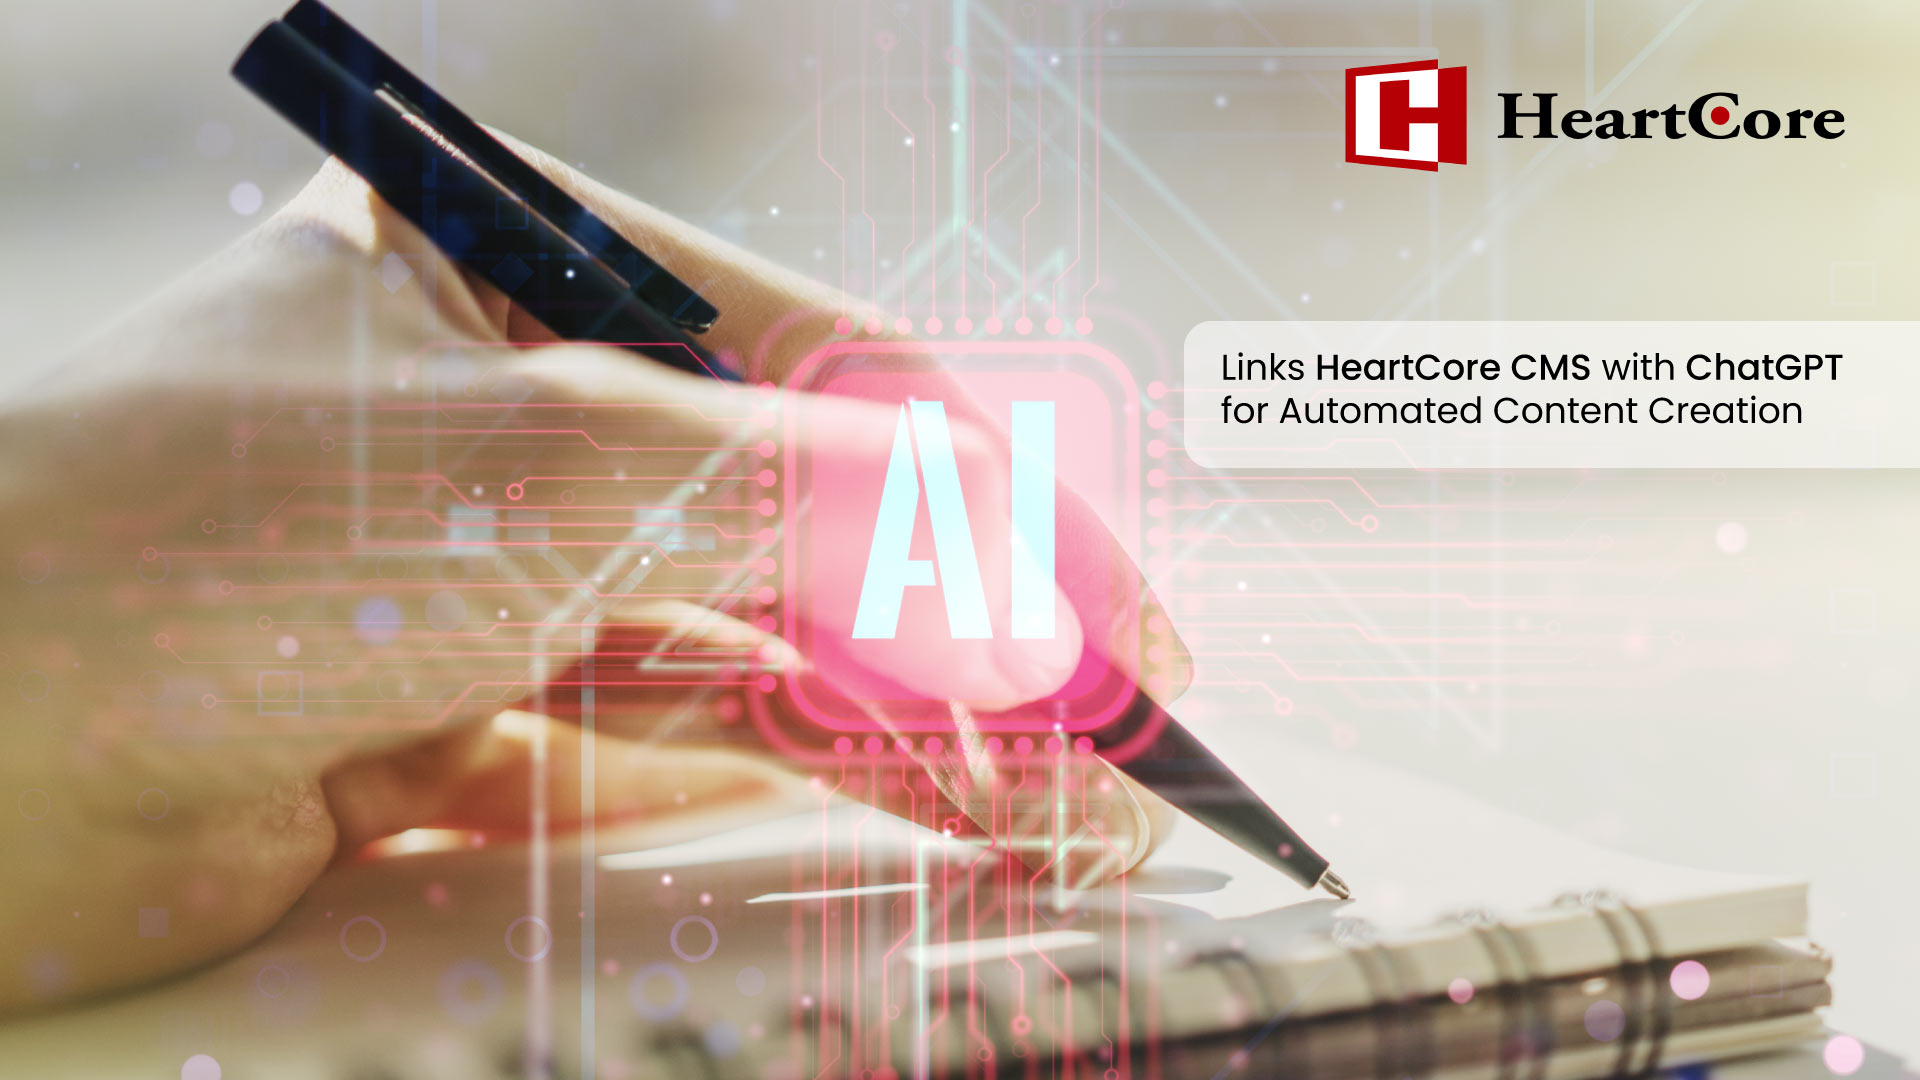 HeartCore Integrates ChatGPT into HeartCore CMS for Automated Content Creation